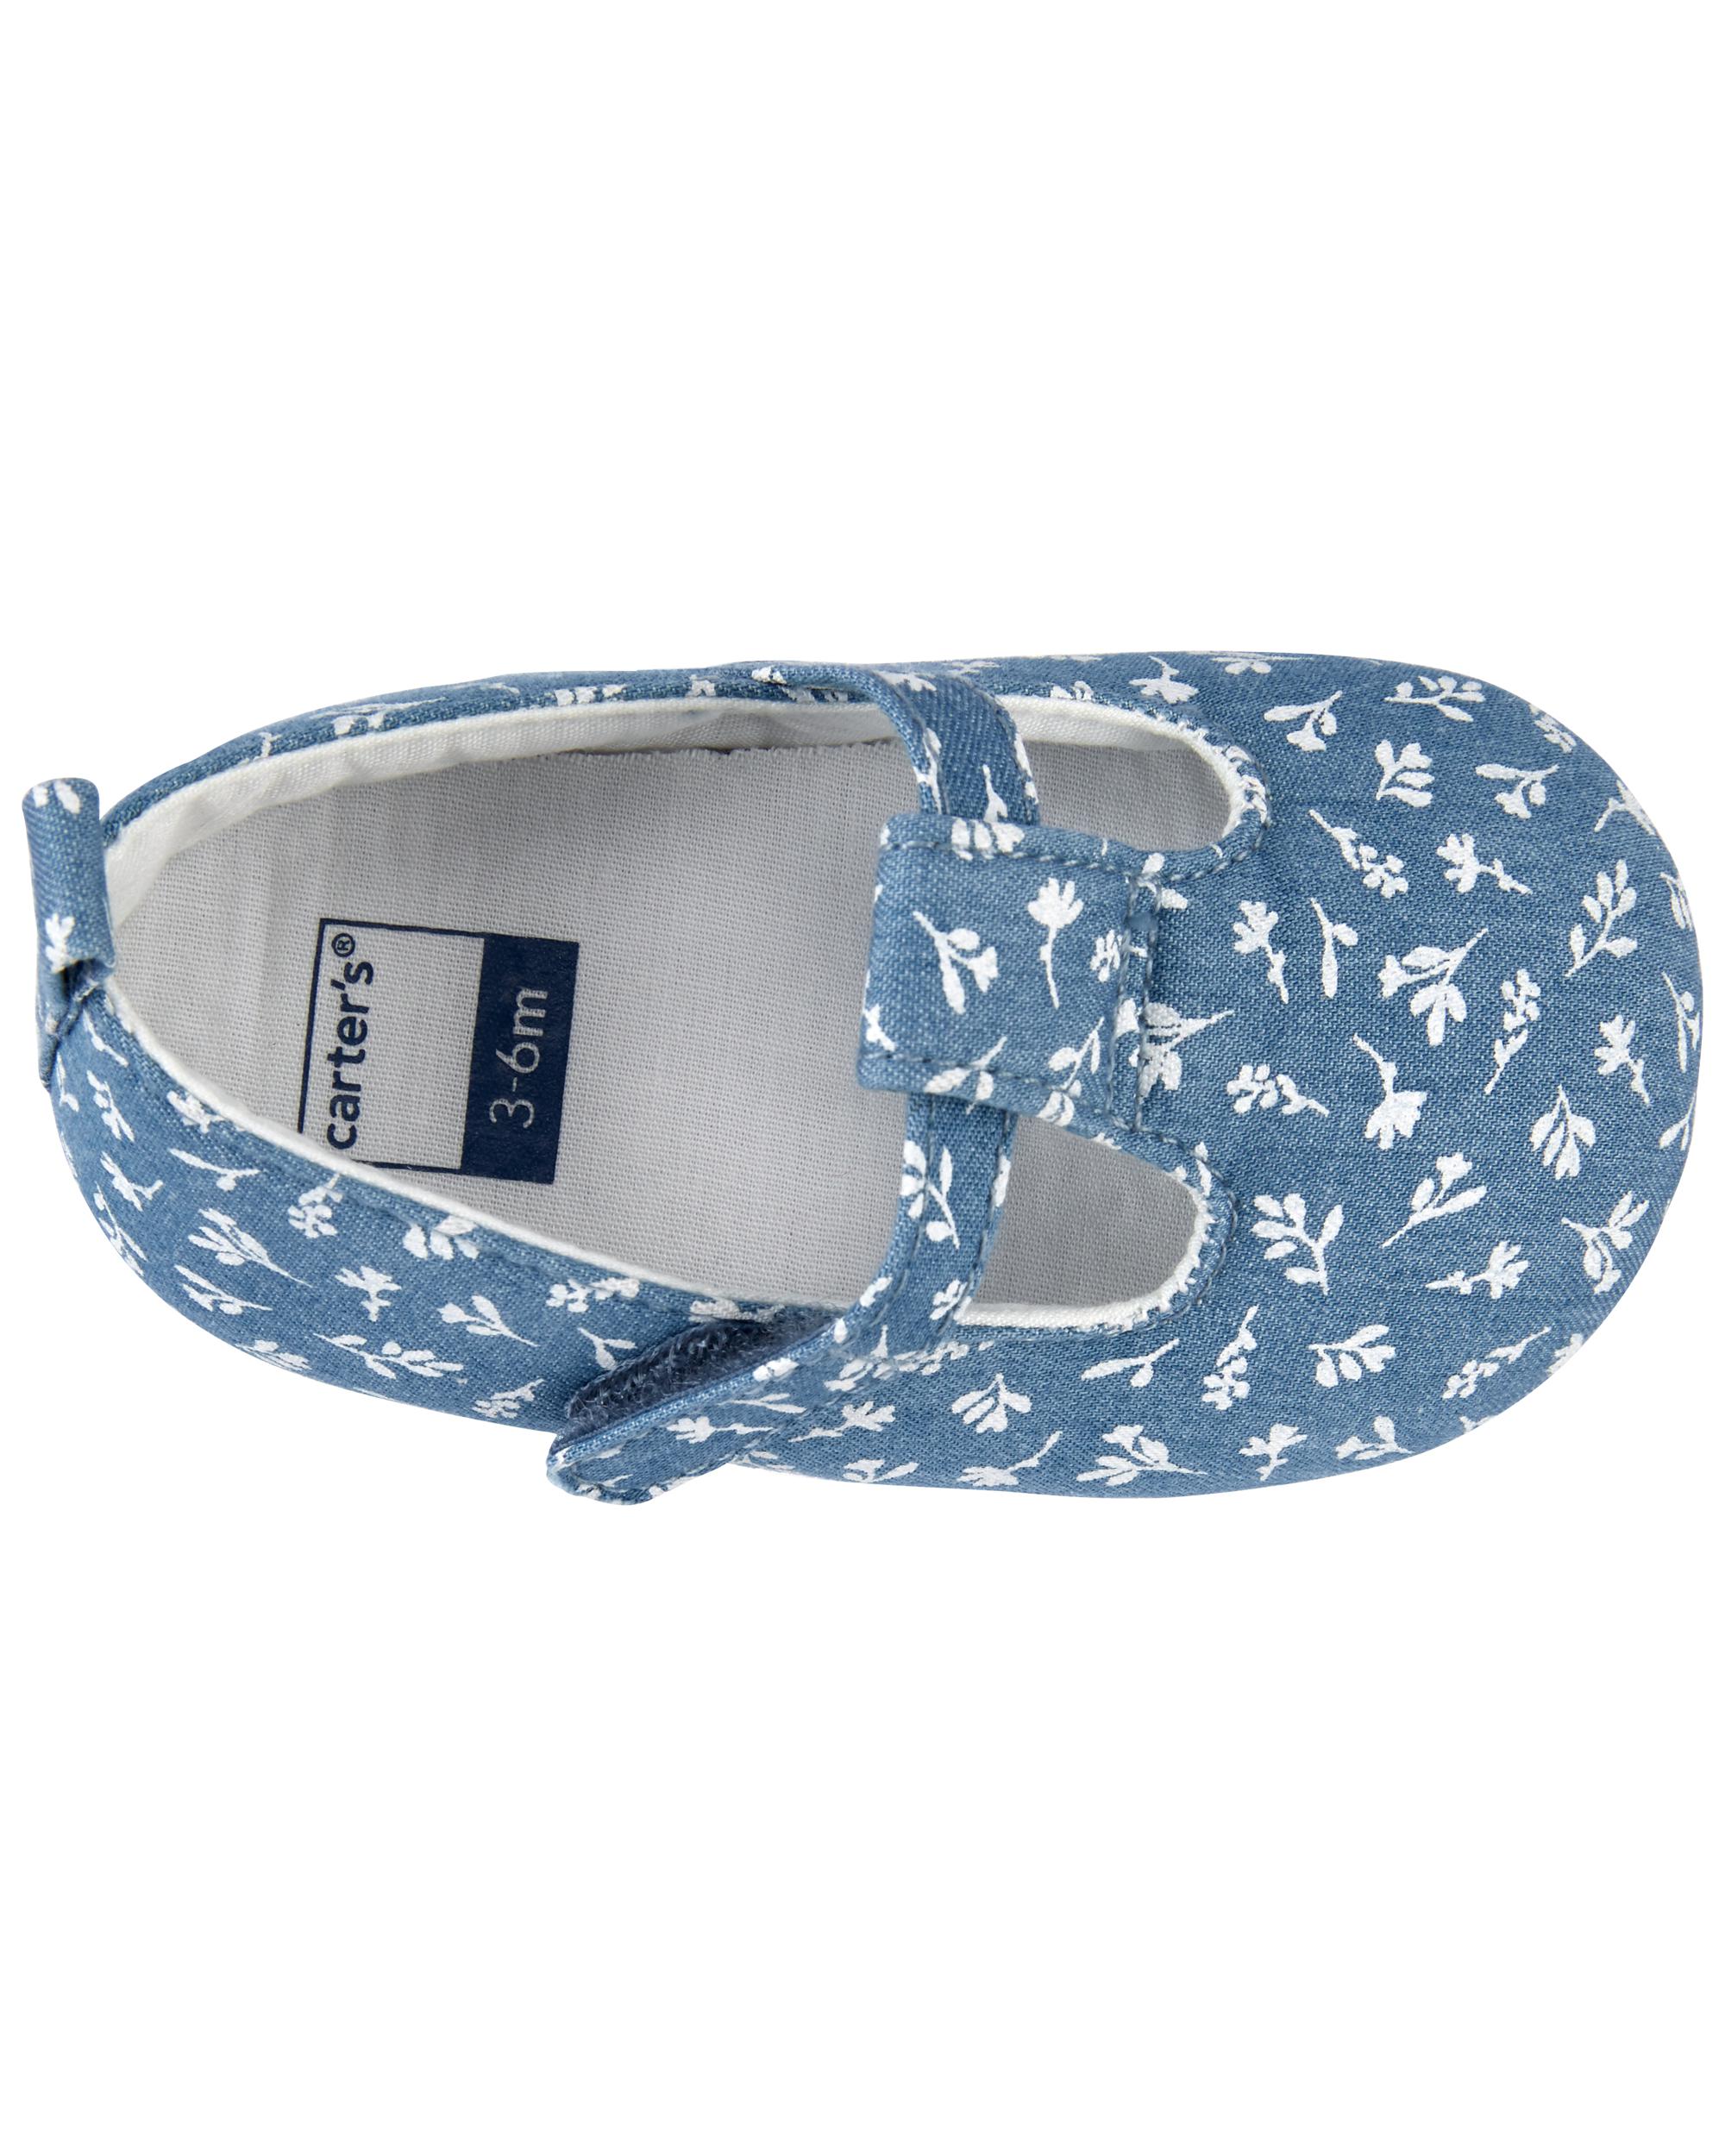 Chambray Baby Shoes